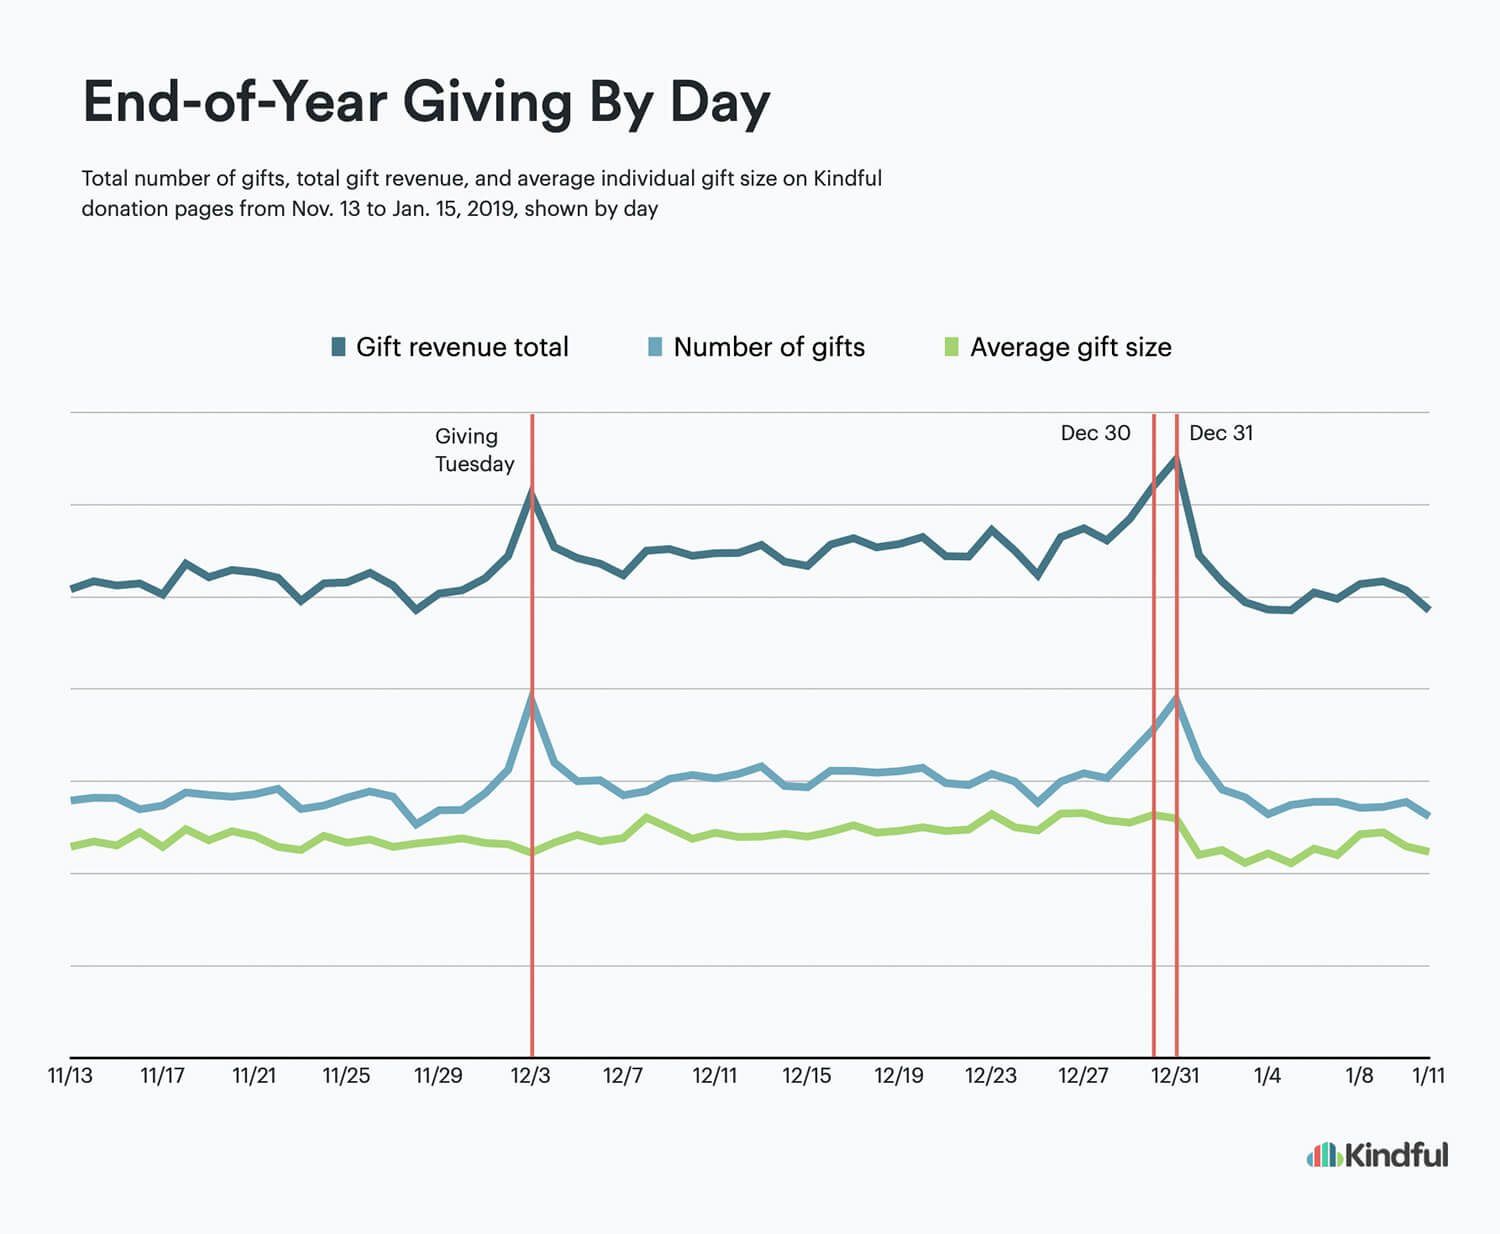 Year-end giving statistics showing total online giving by day in 2019 from Thanksgiving through to Dec 31